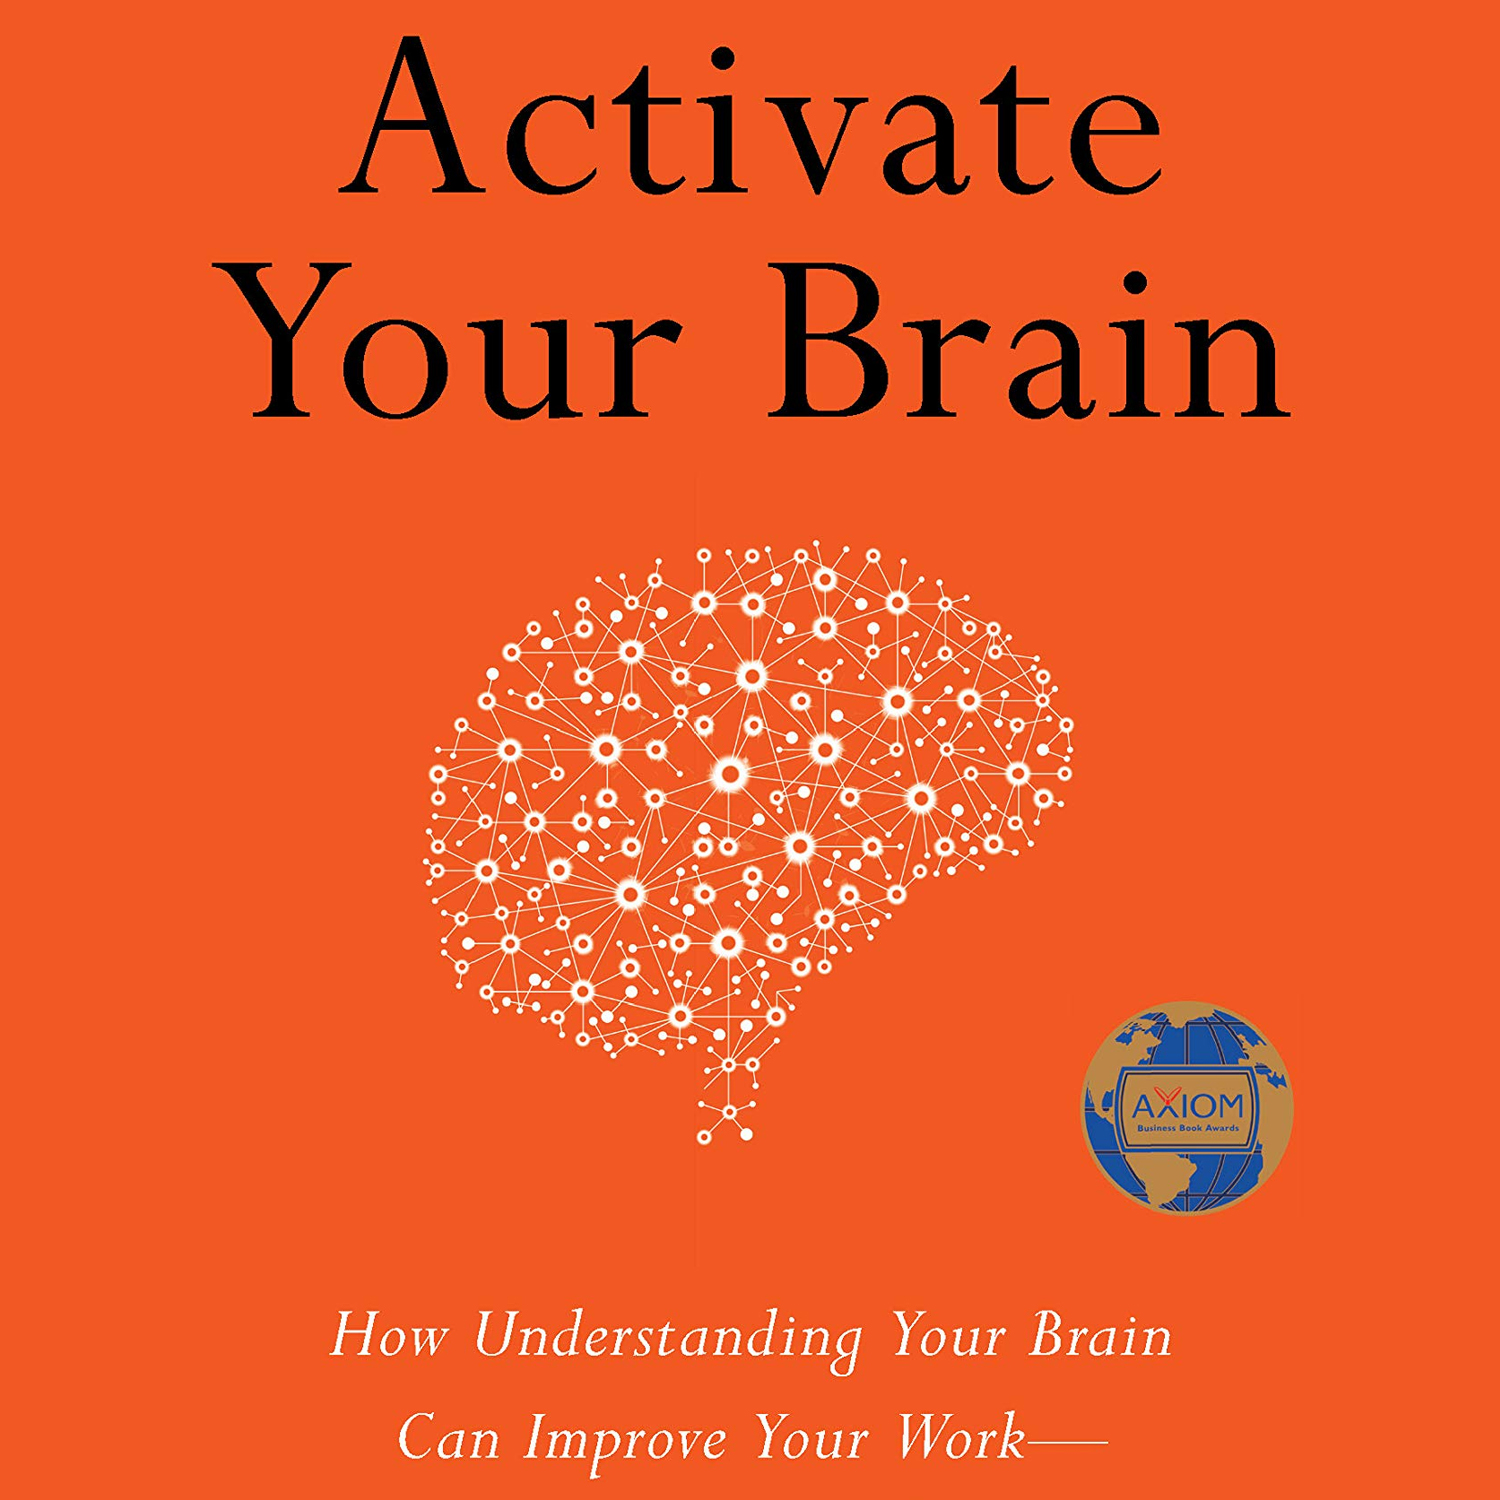 Activate Your Brain | Books By Scott Halford